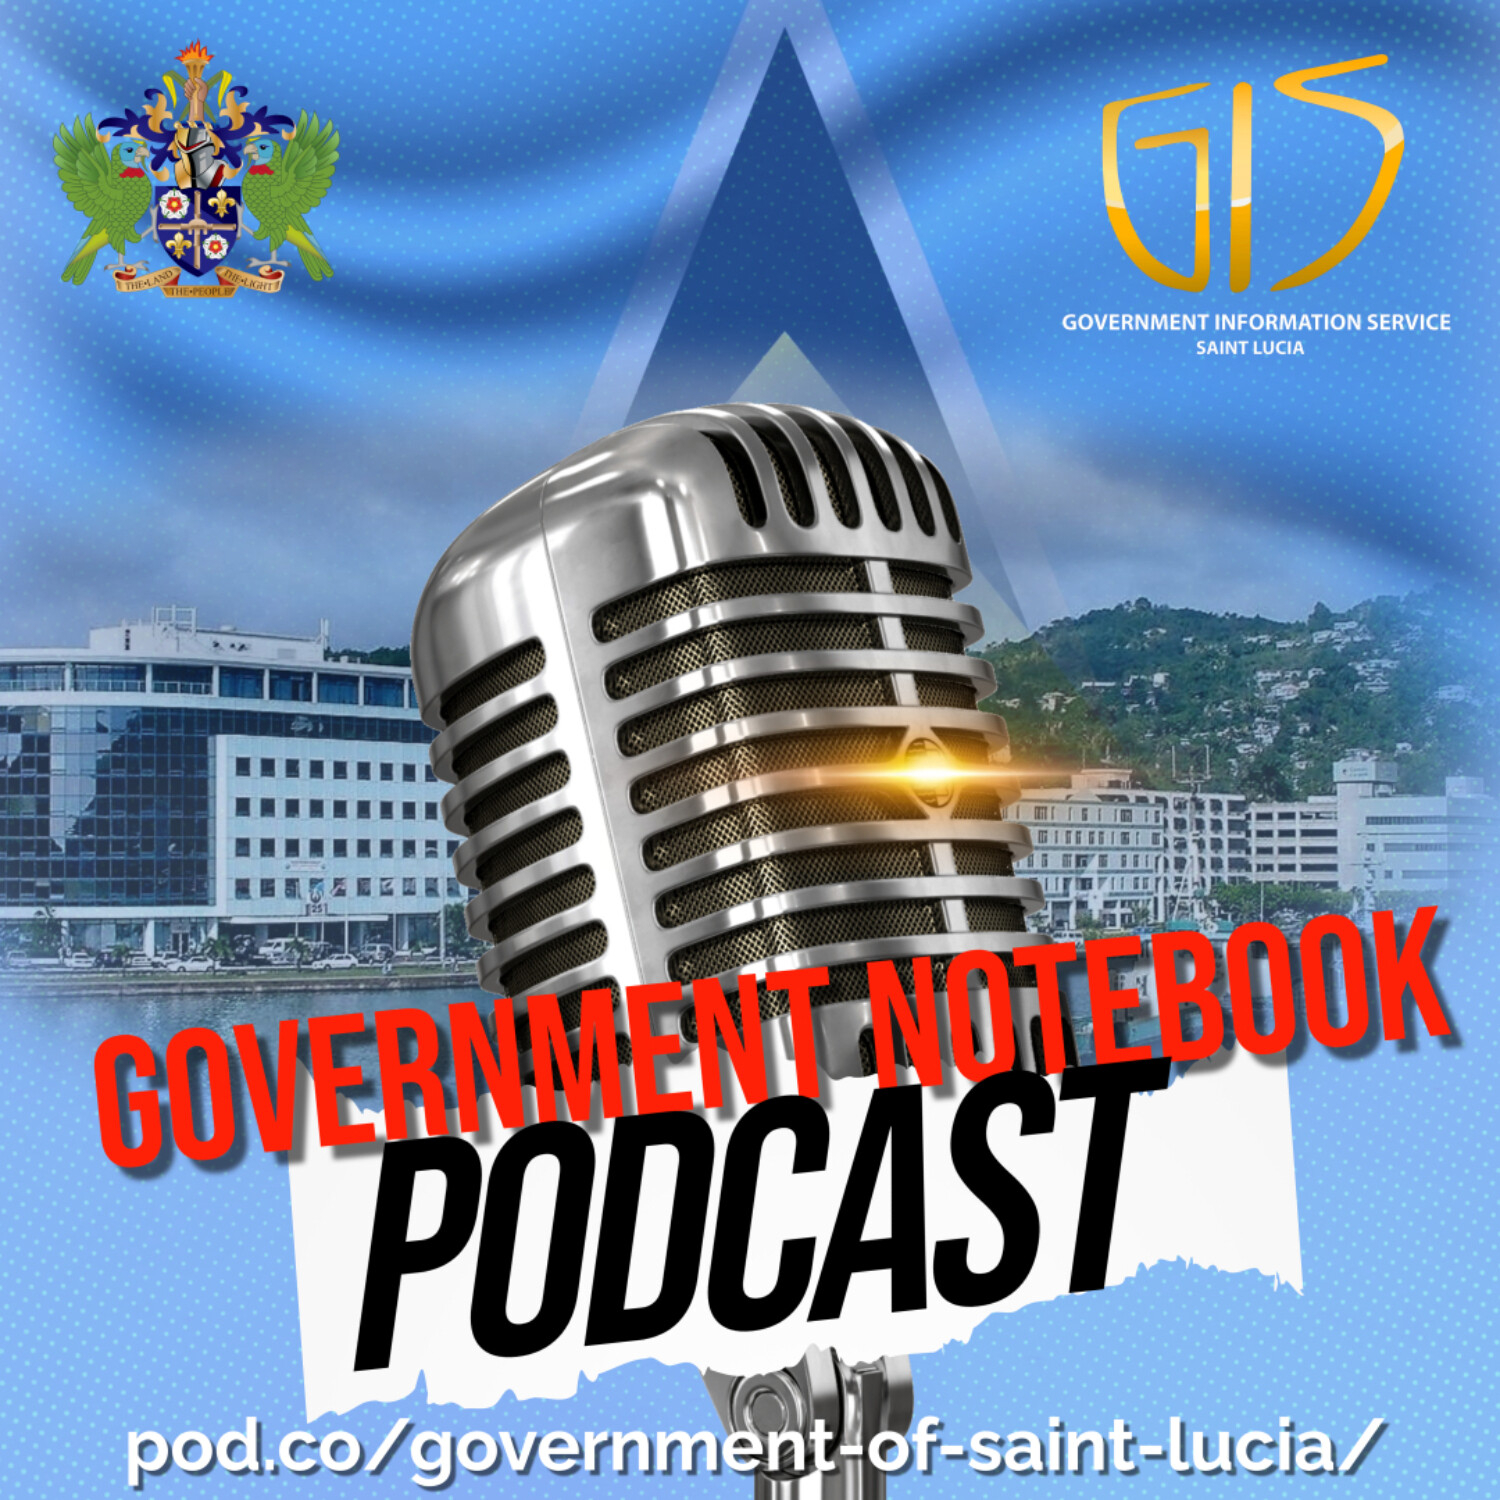 Government of Saint Lucia